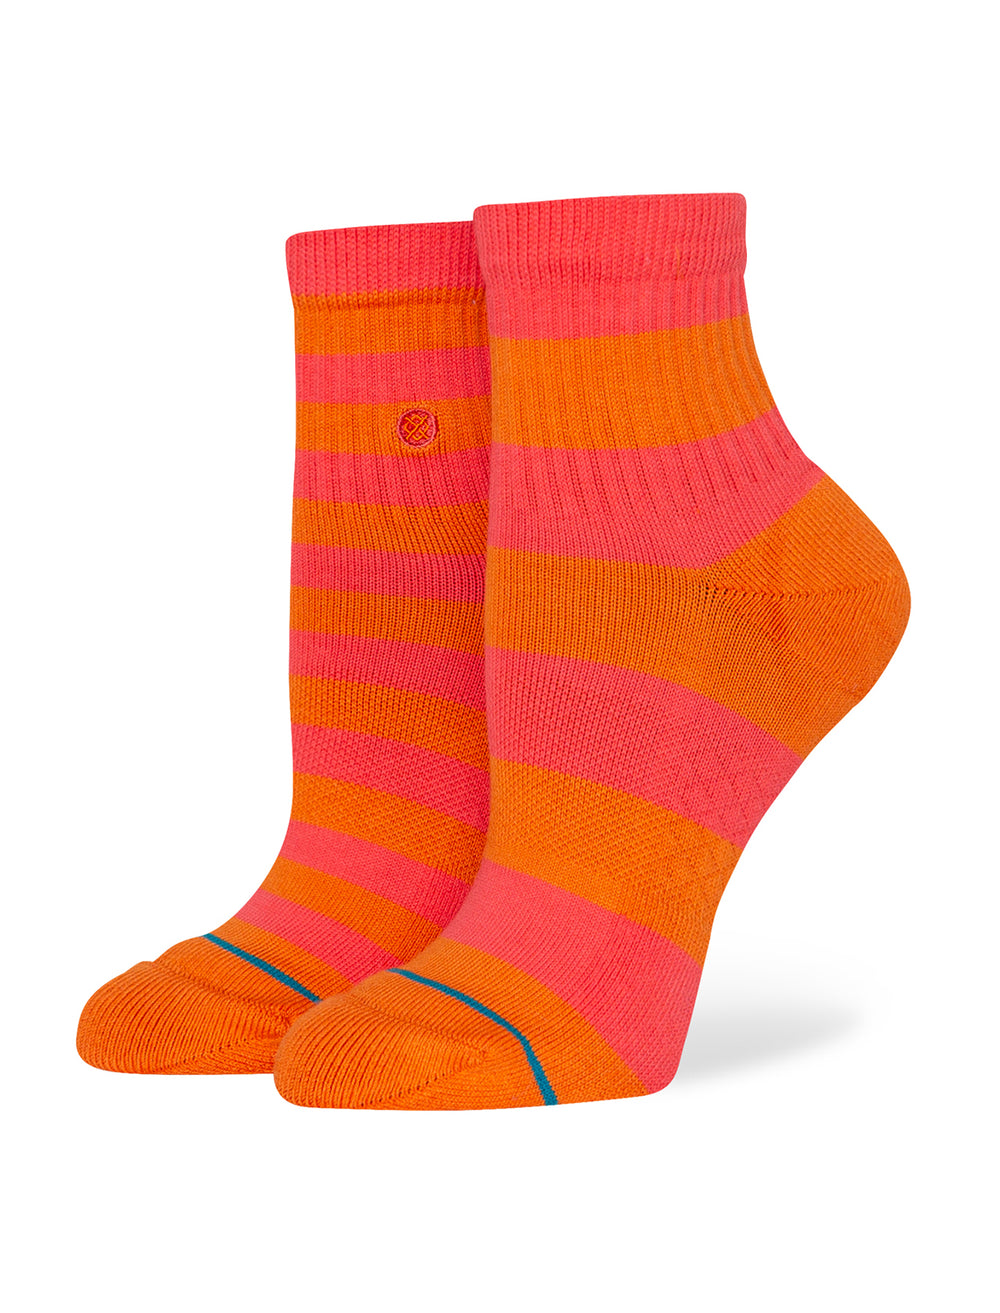 Stance's cotton quarter socks in balancing act orange on a foot form.